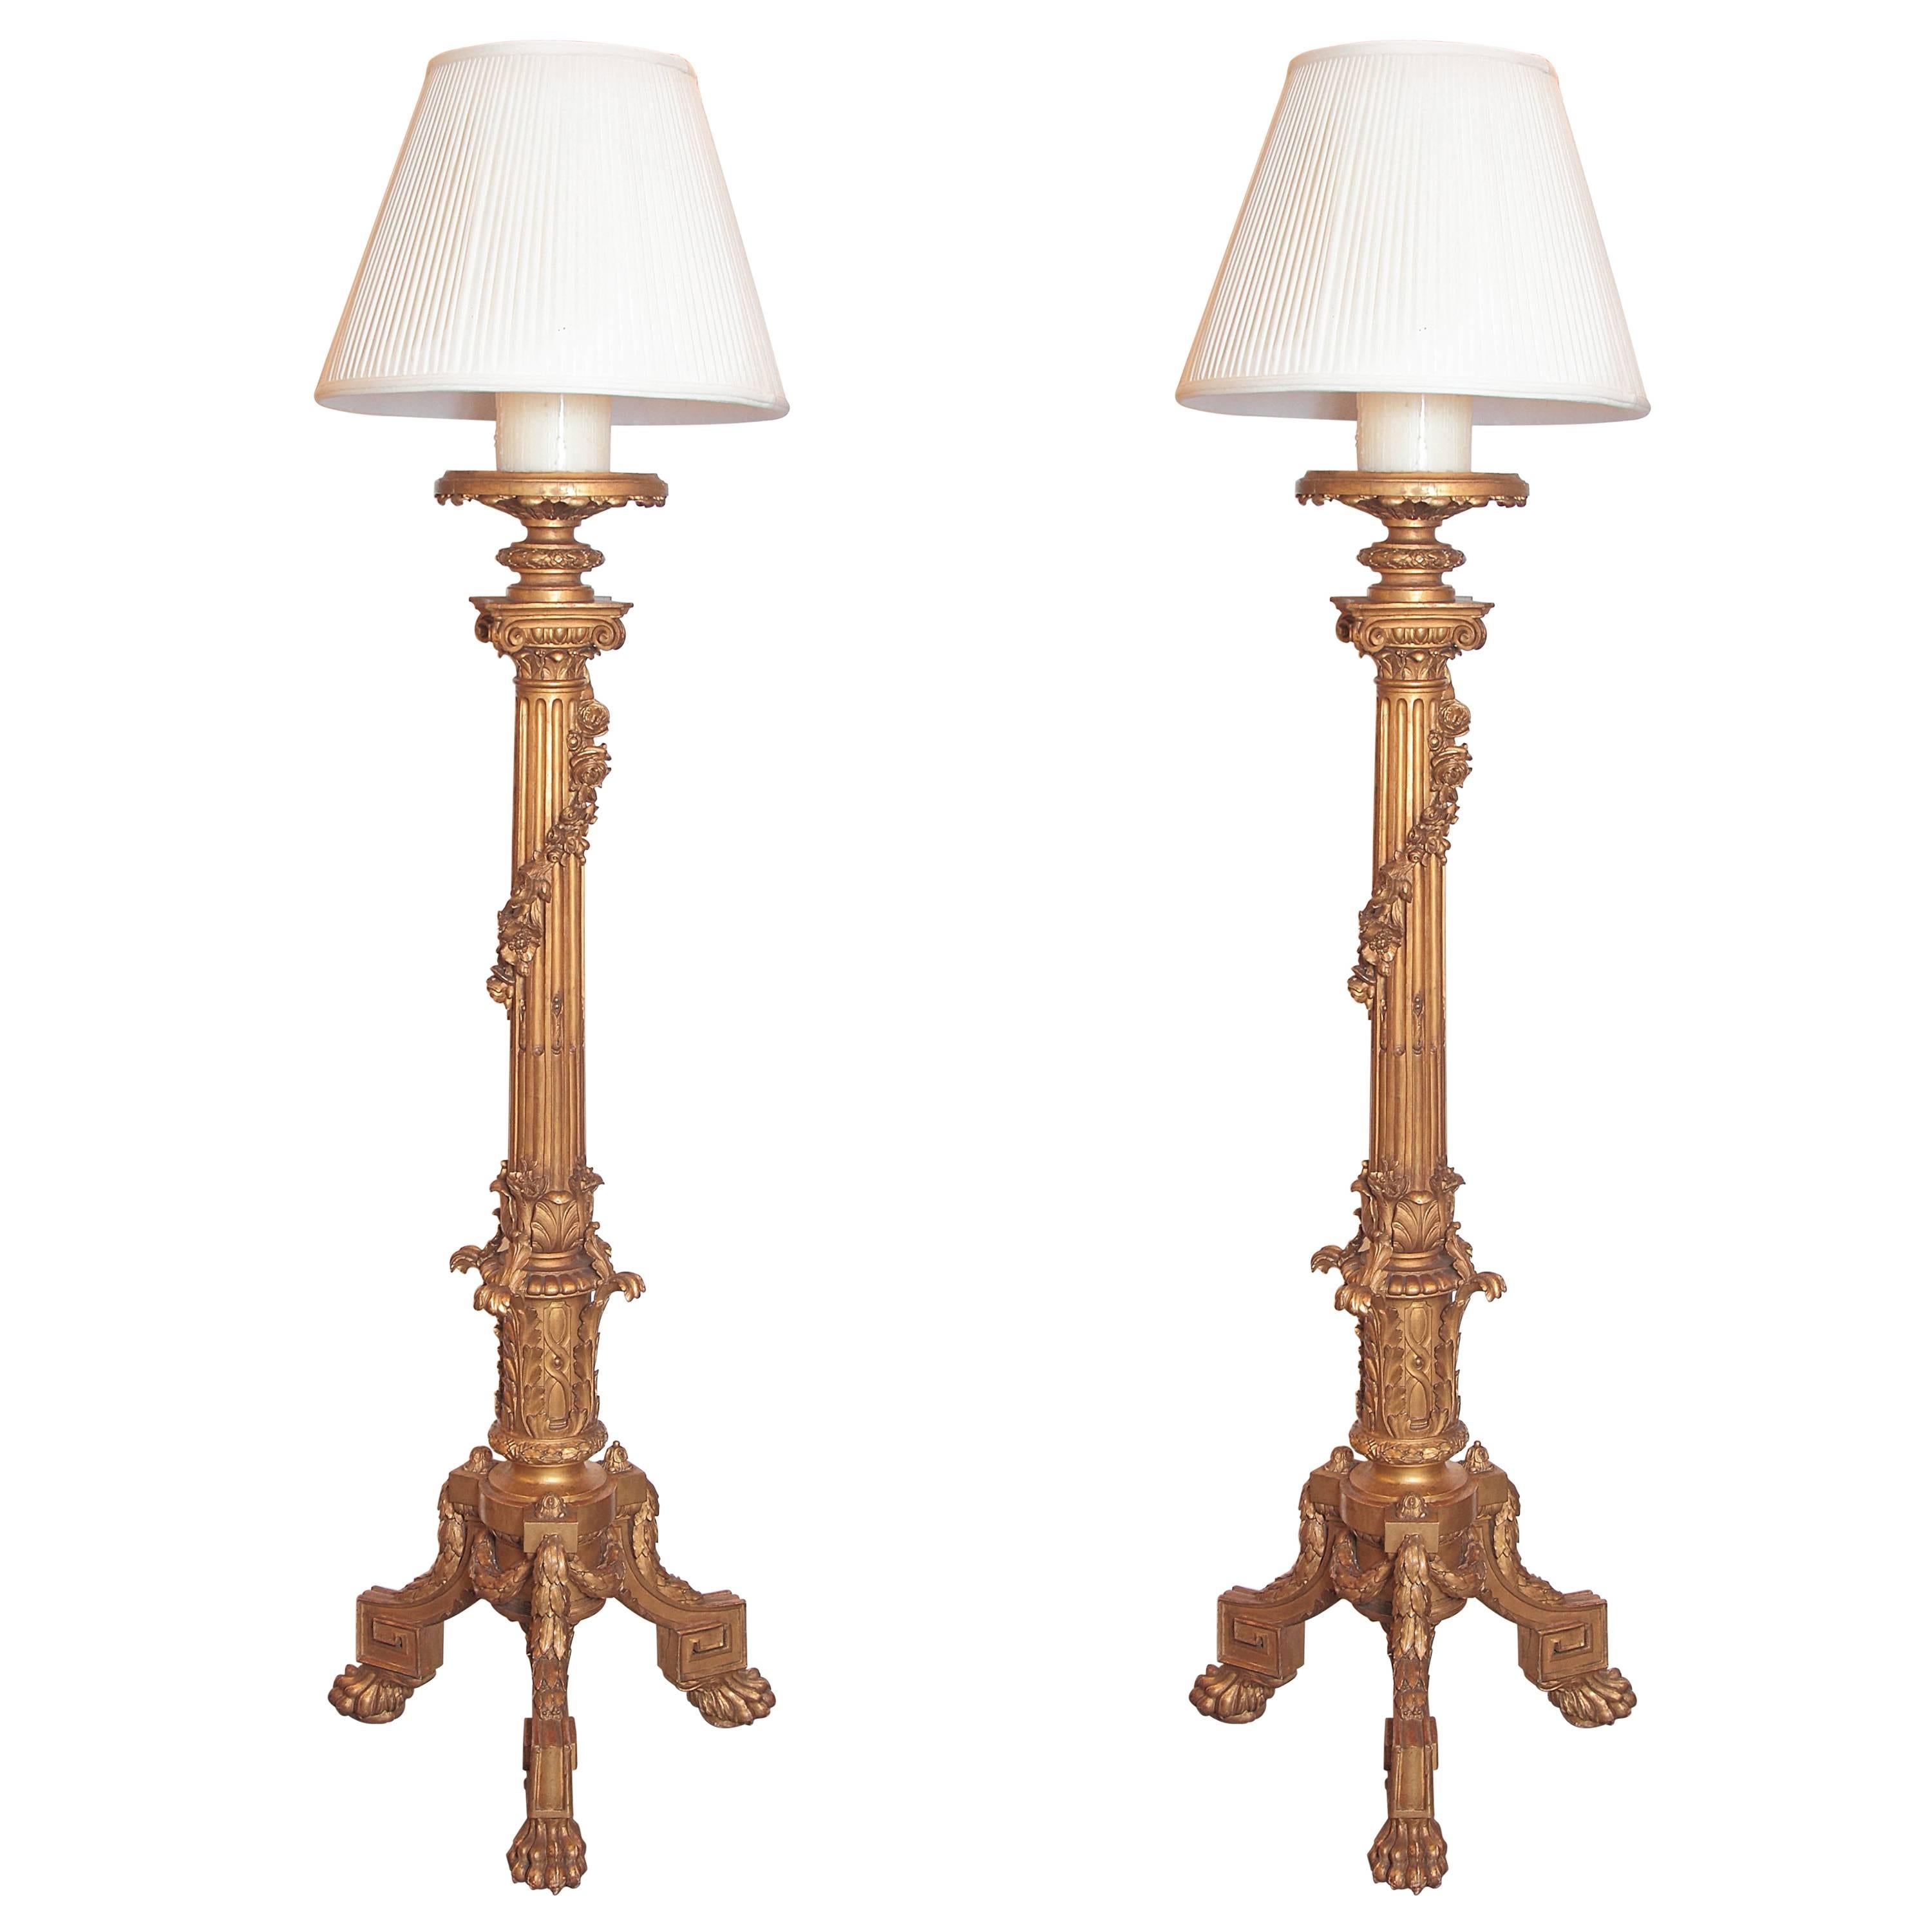 Pair of 19th Century French Gilt Carved Regence Floor Lamps